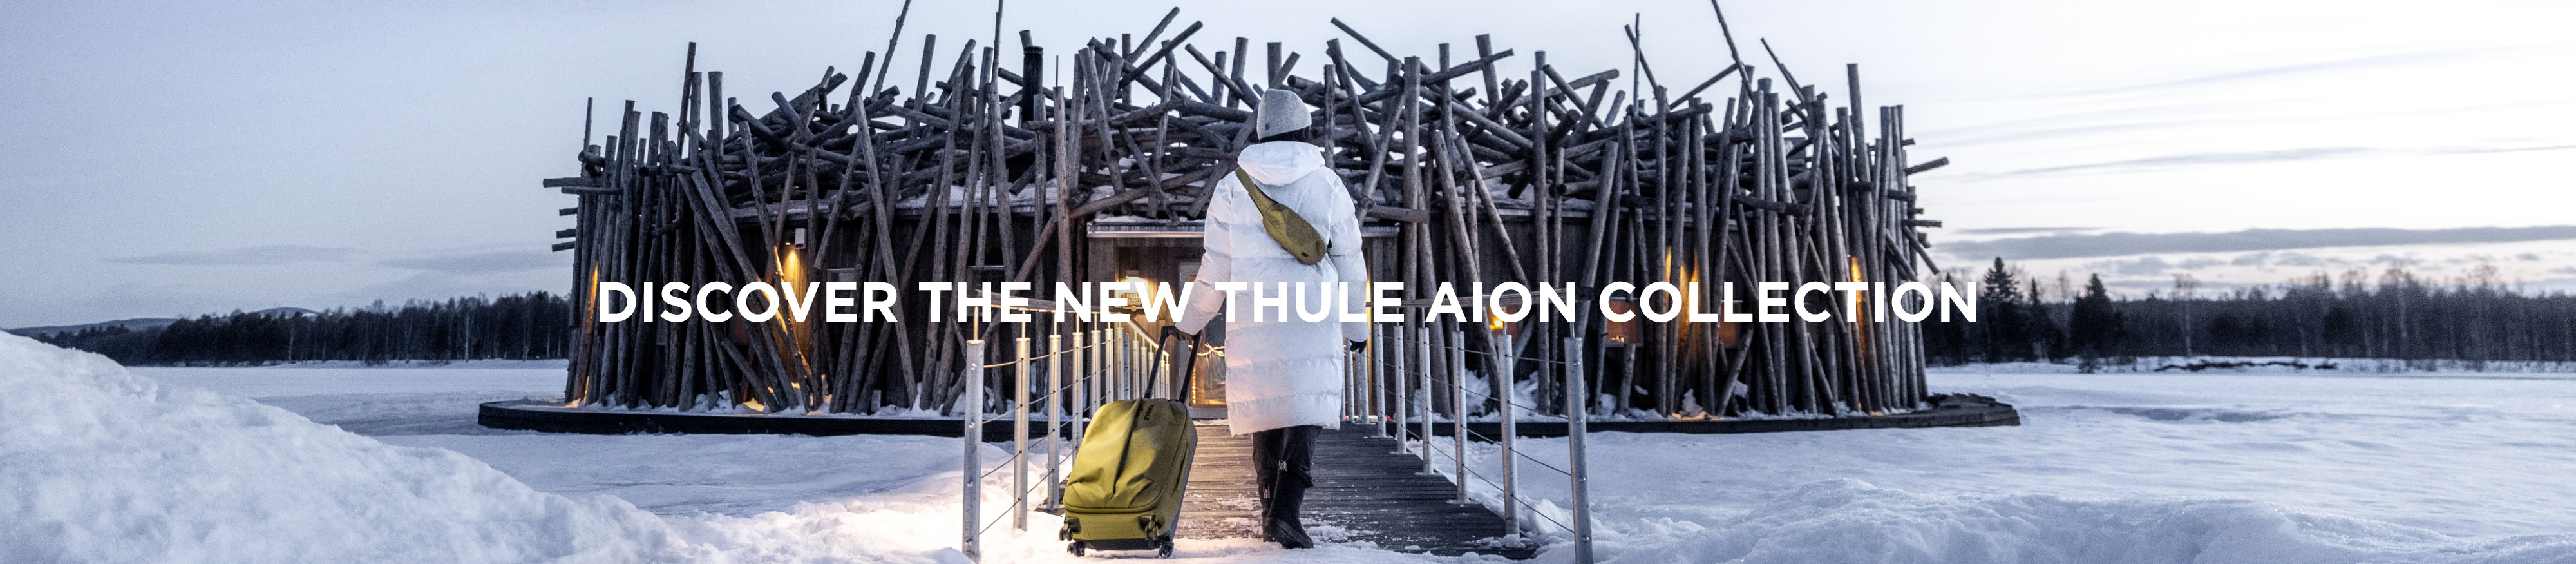 Thule Aion Collection